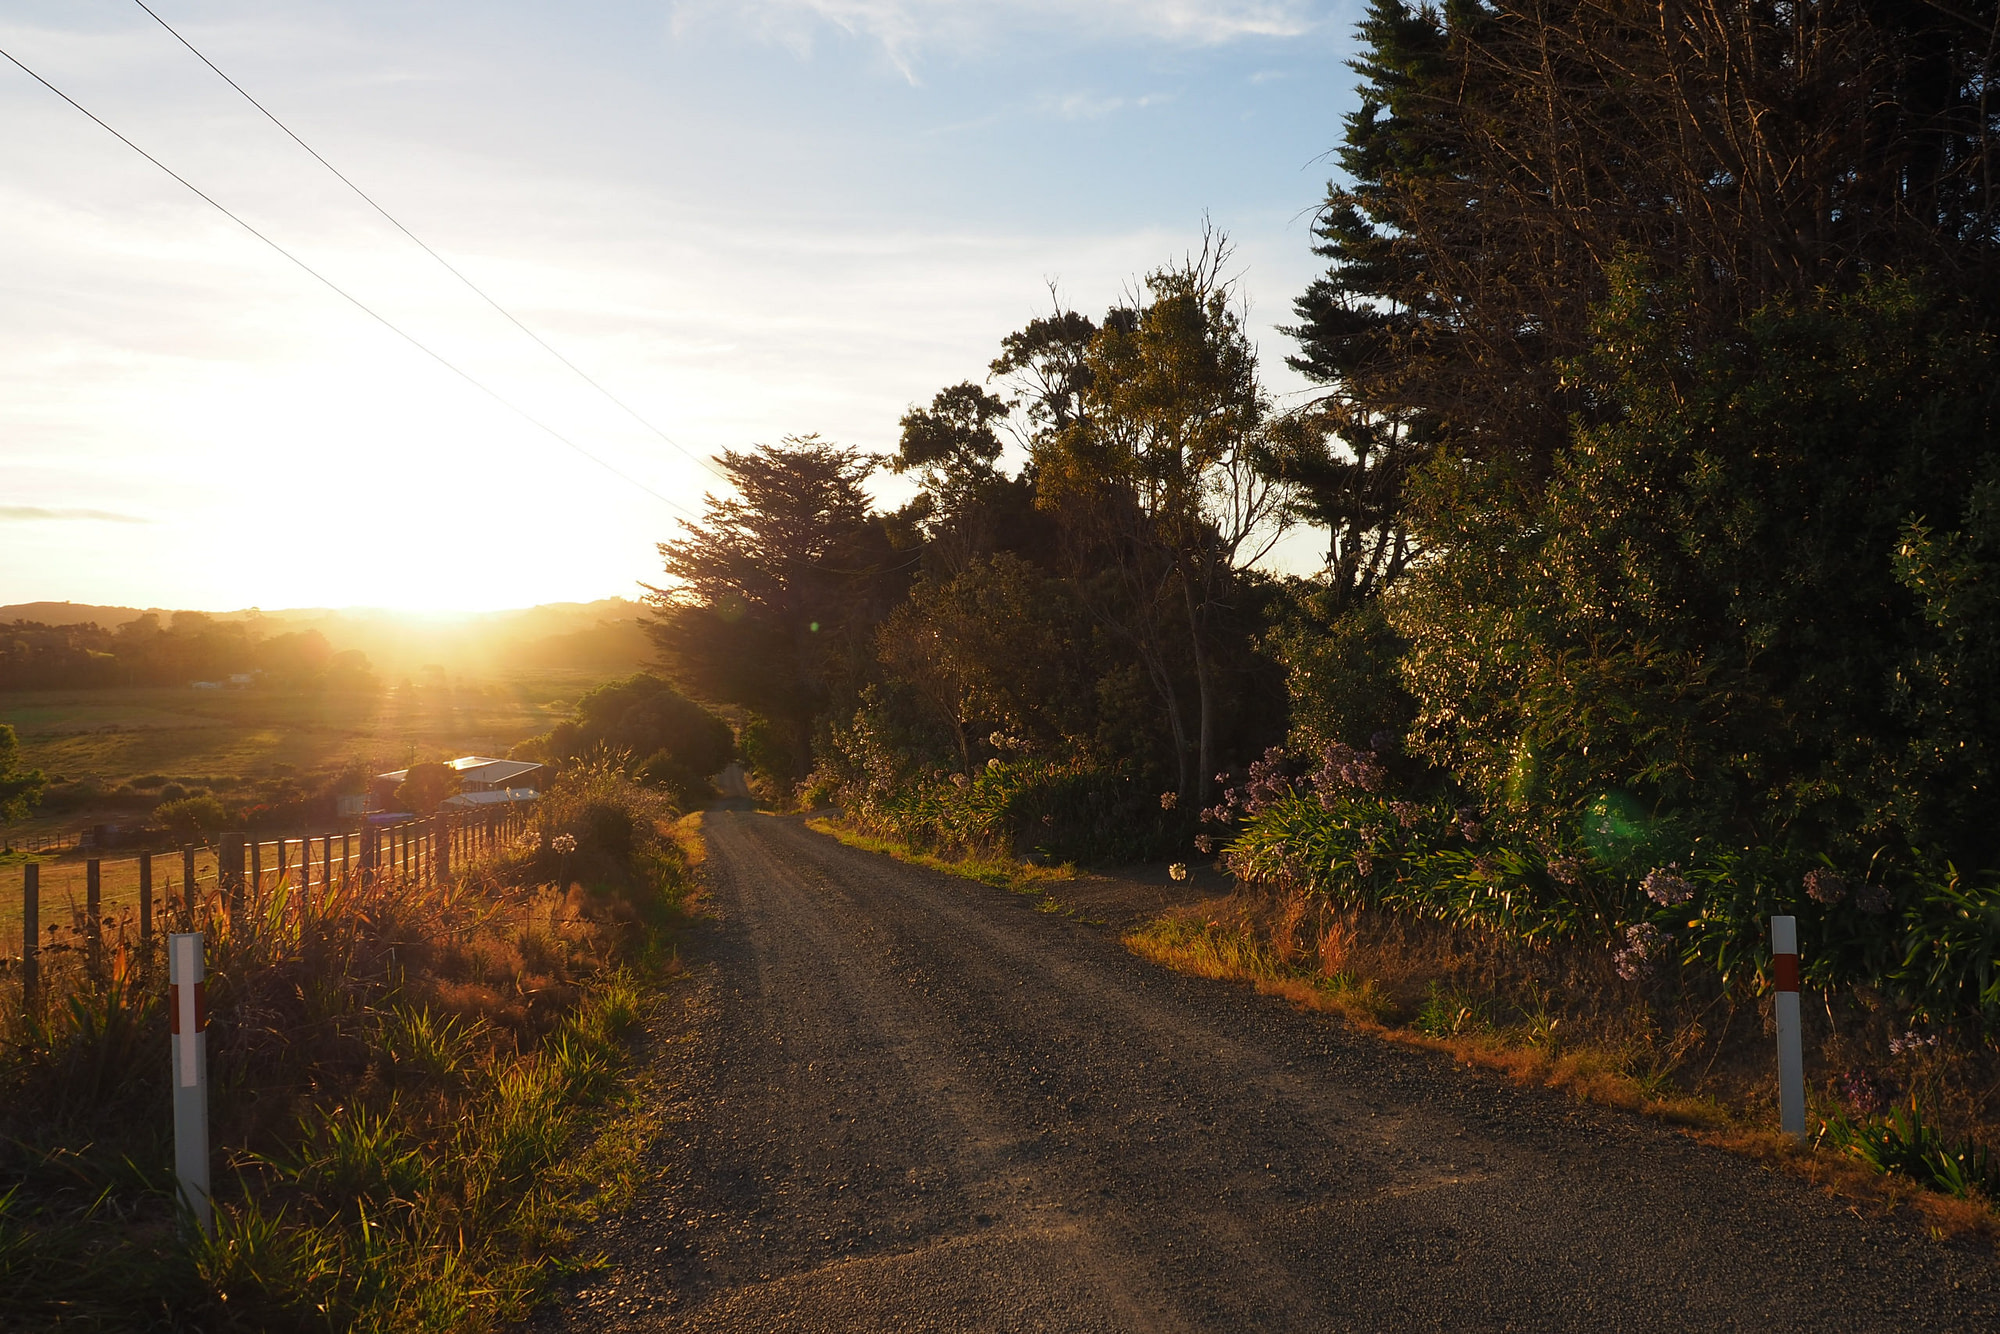 Gravel road at sunset with trees